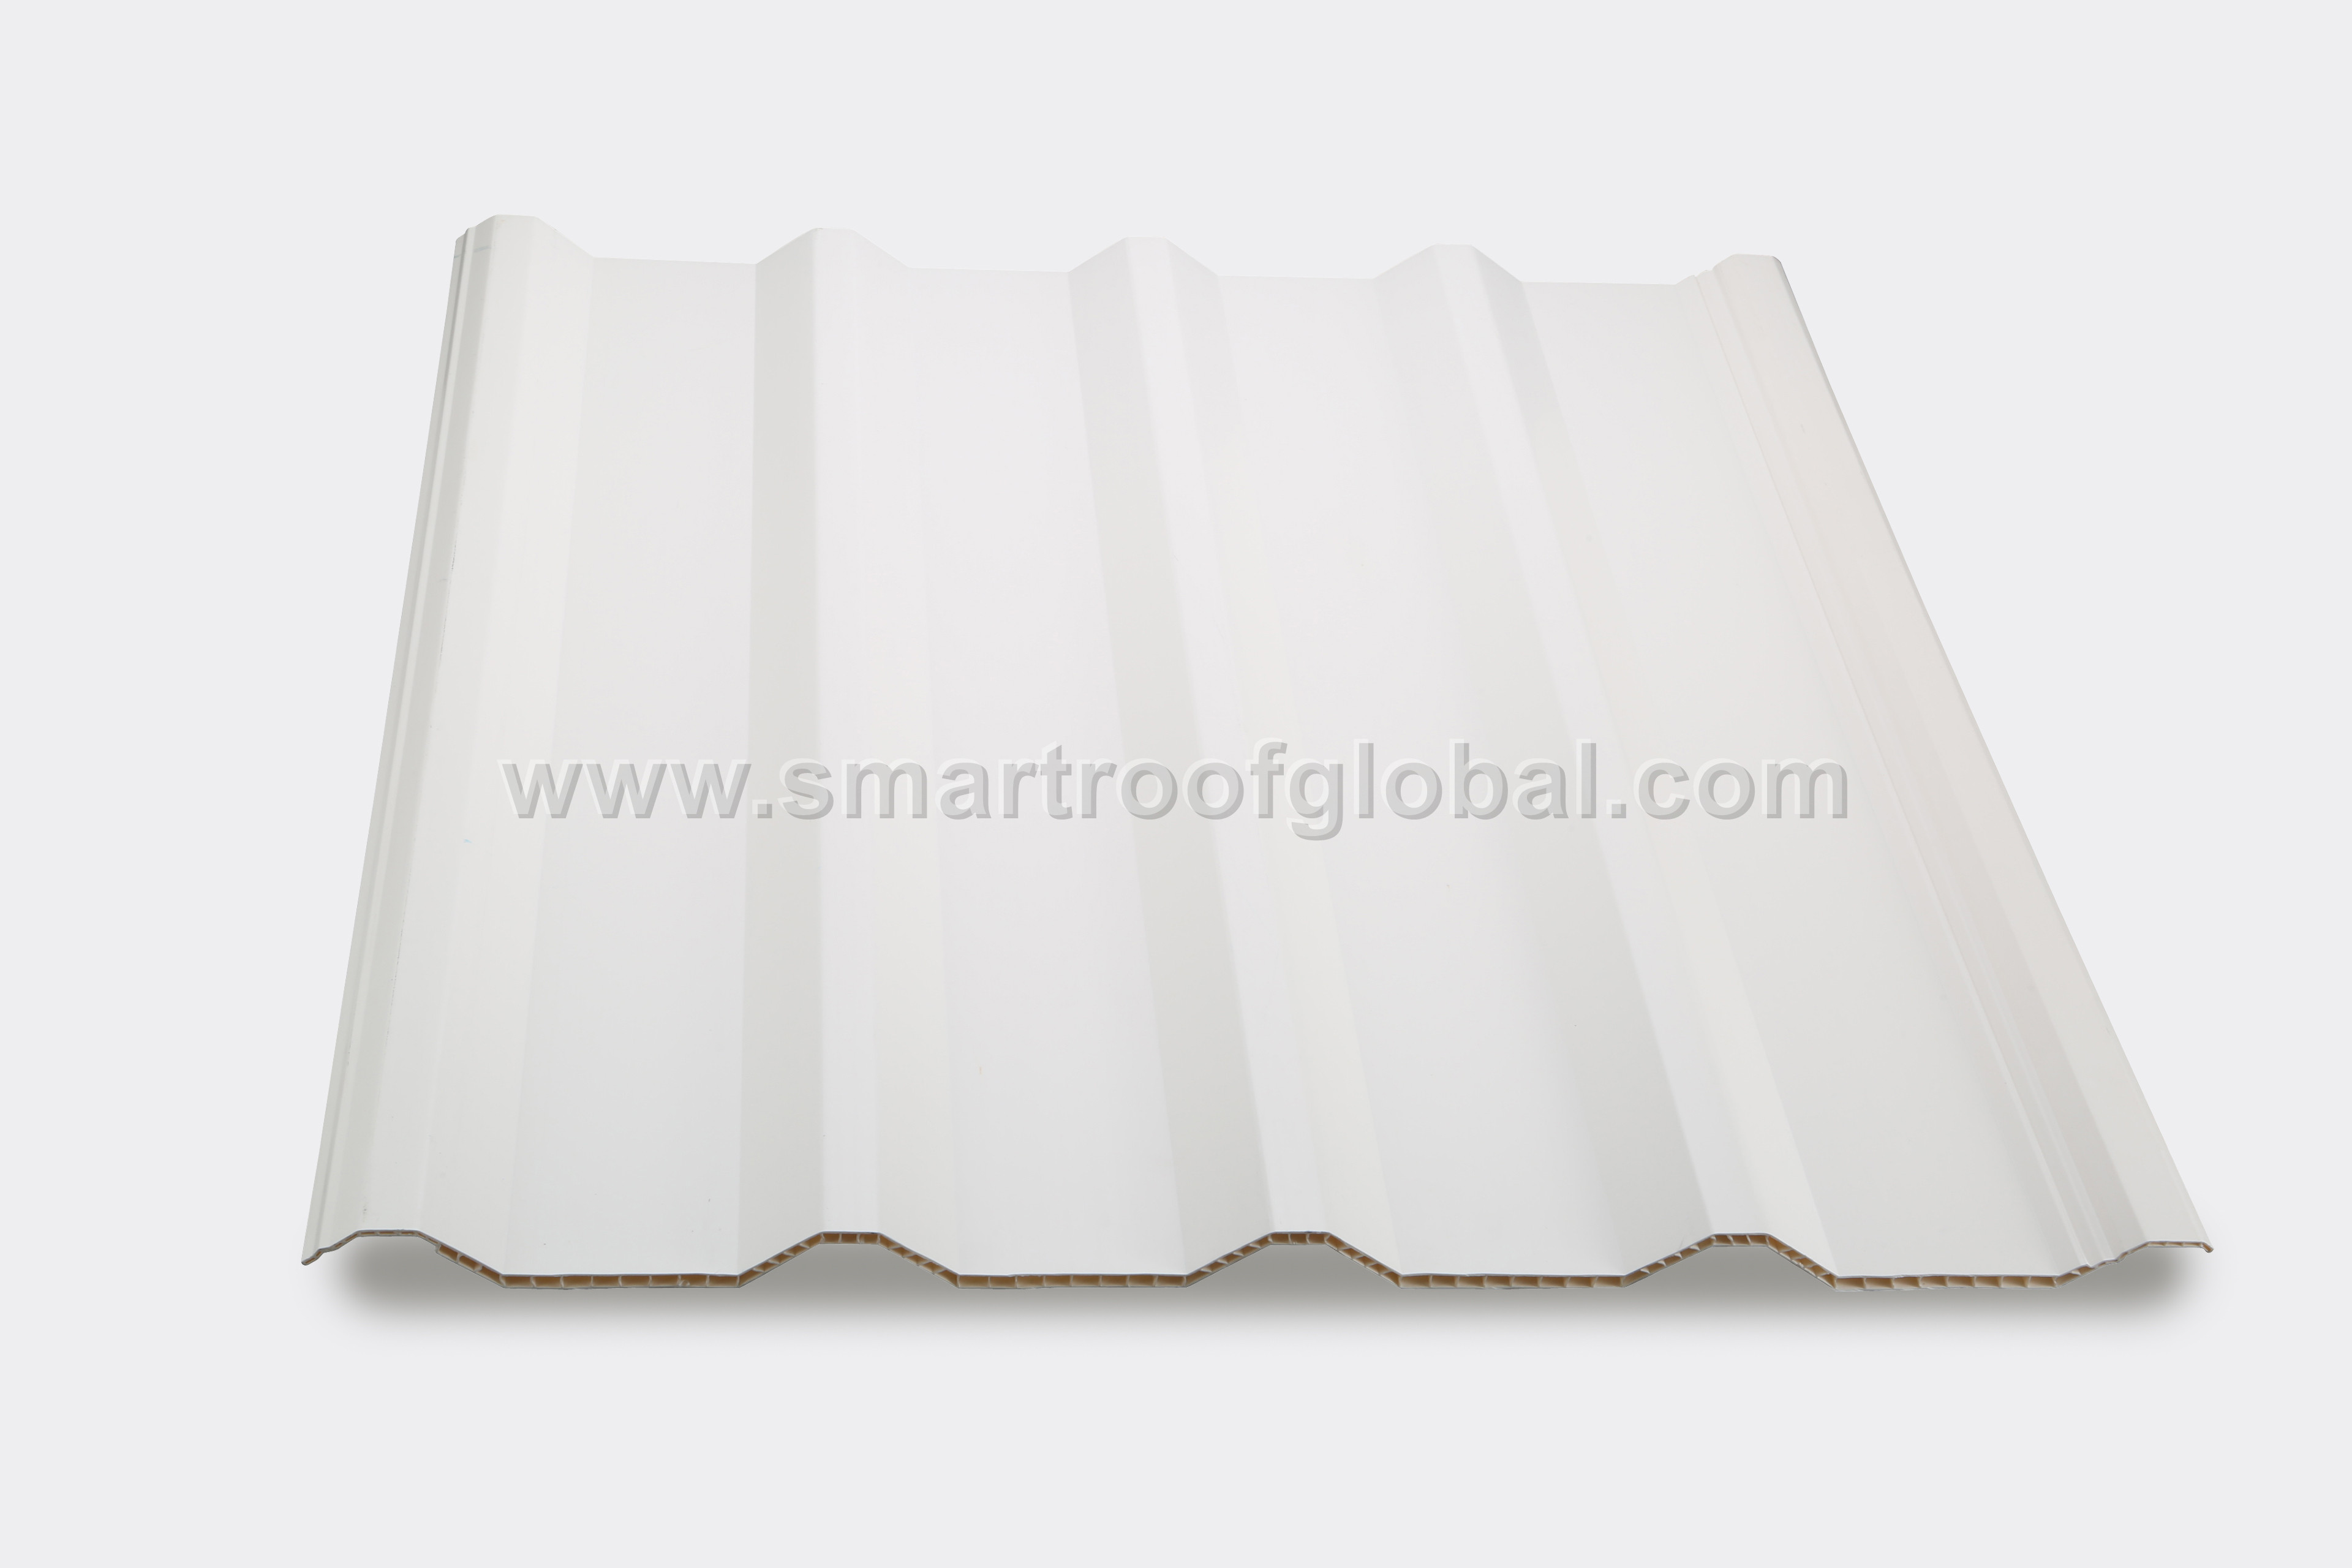 Best Price on Corrugated Tile - Polycarbonate Roof – Smartroof